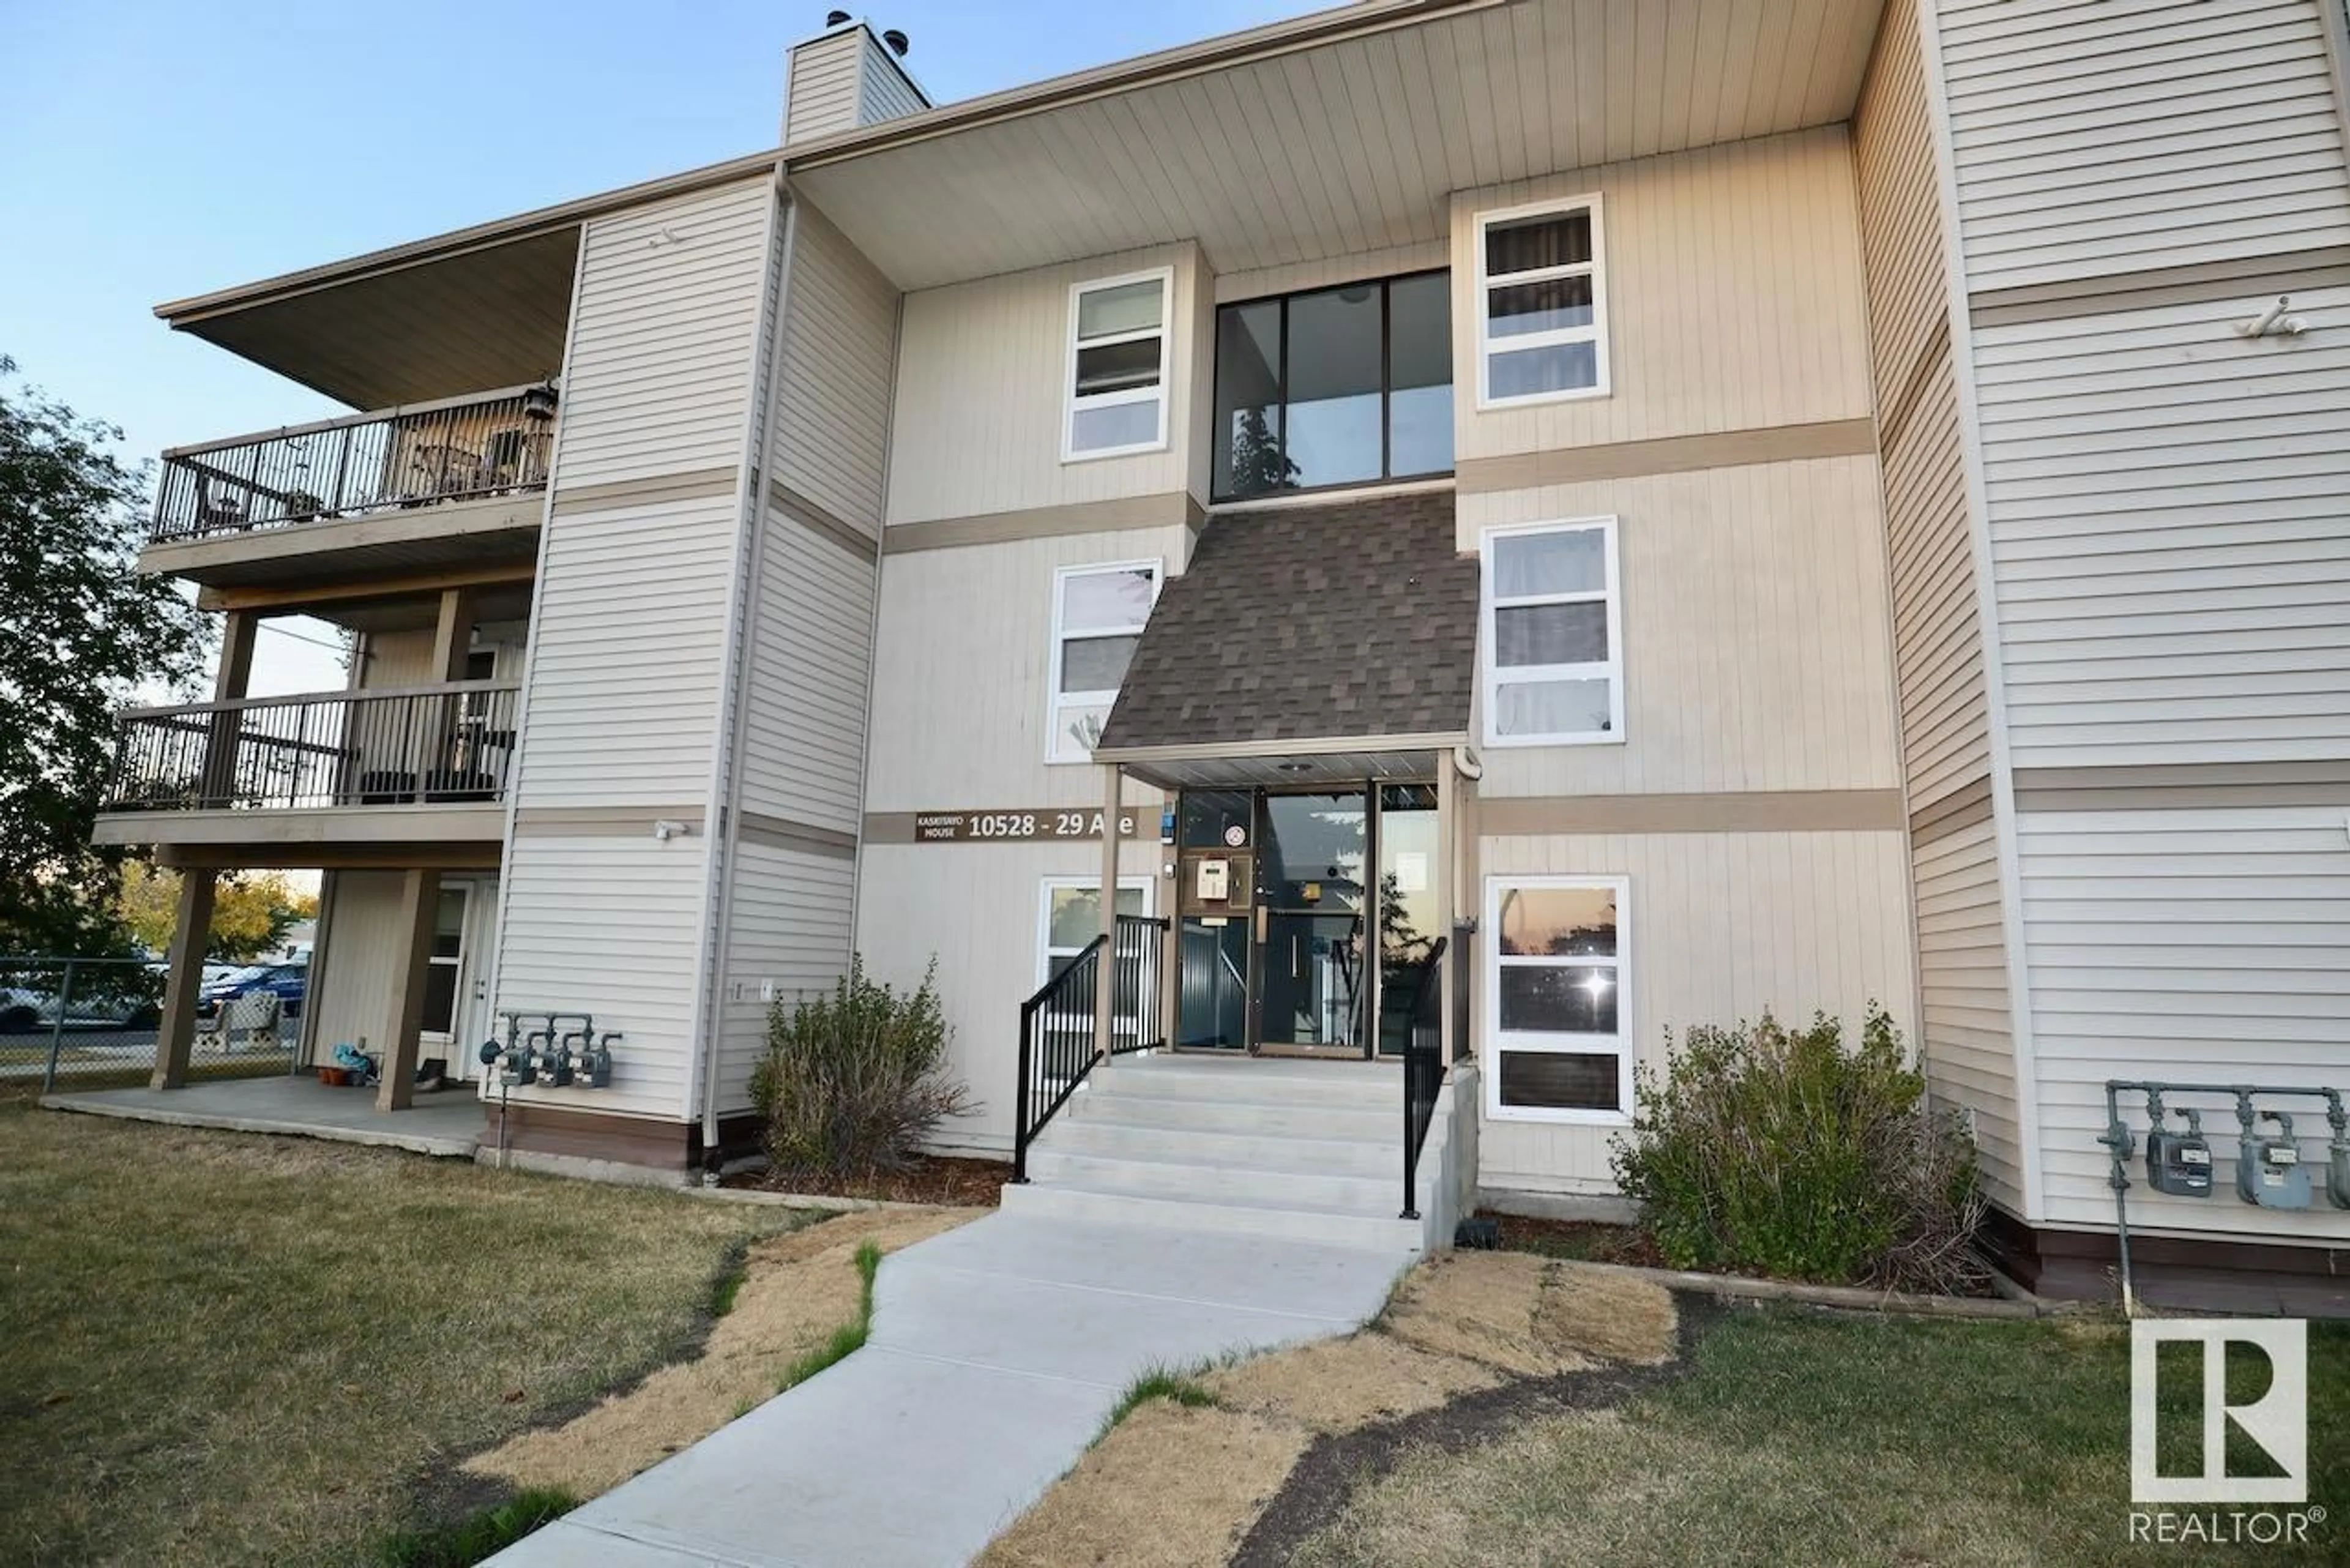 A pic from exterior of the house or condo for #102 10528 29 AV NW, Edmonton Alberta T6J4J2